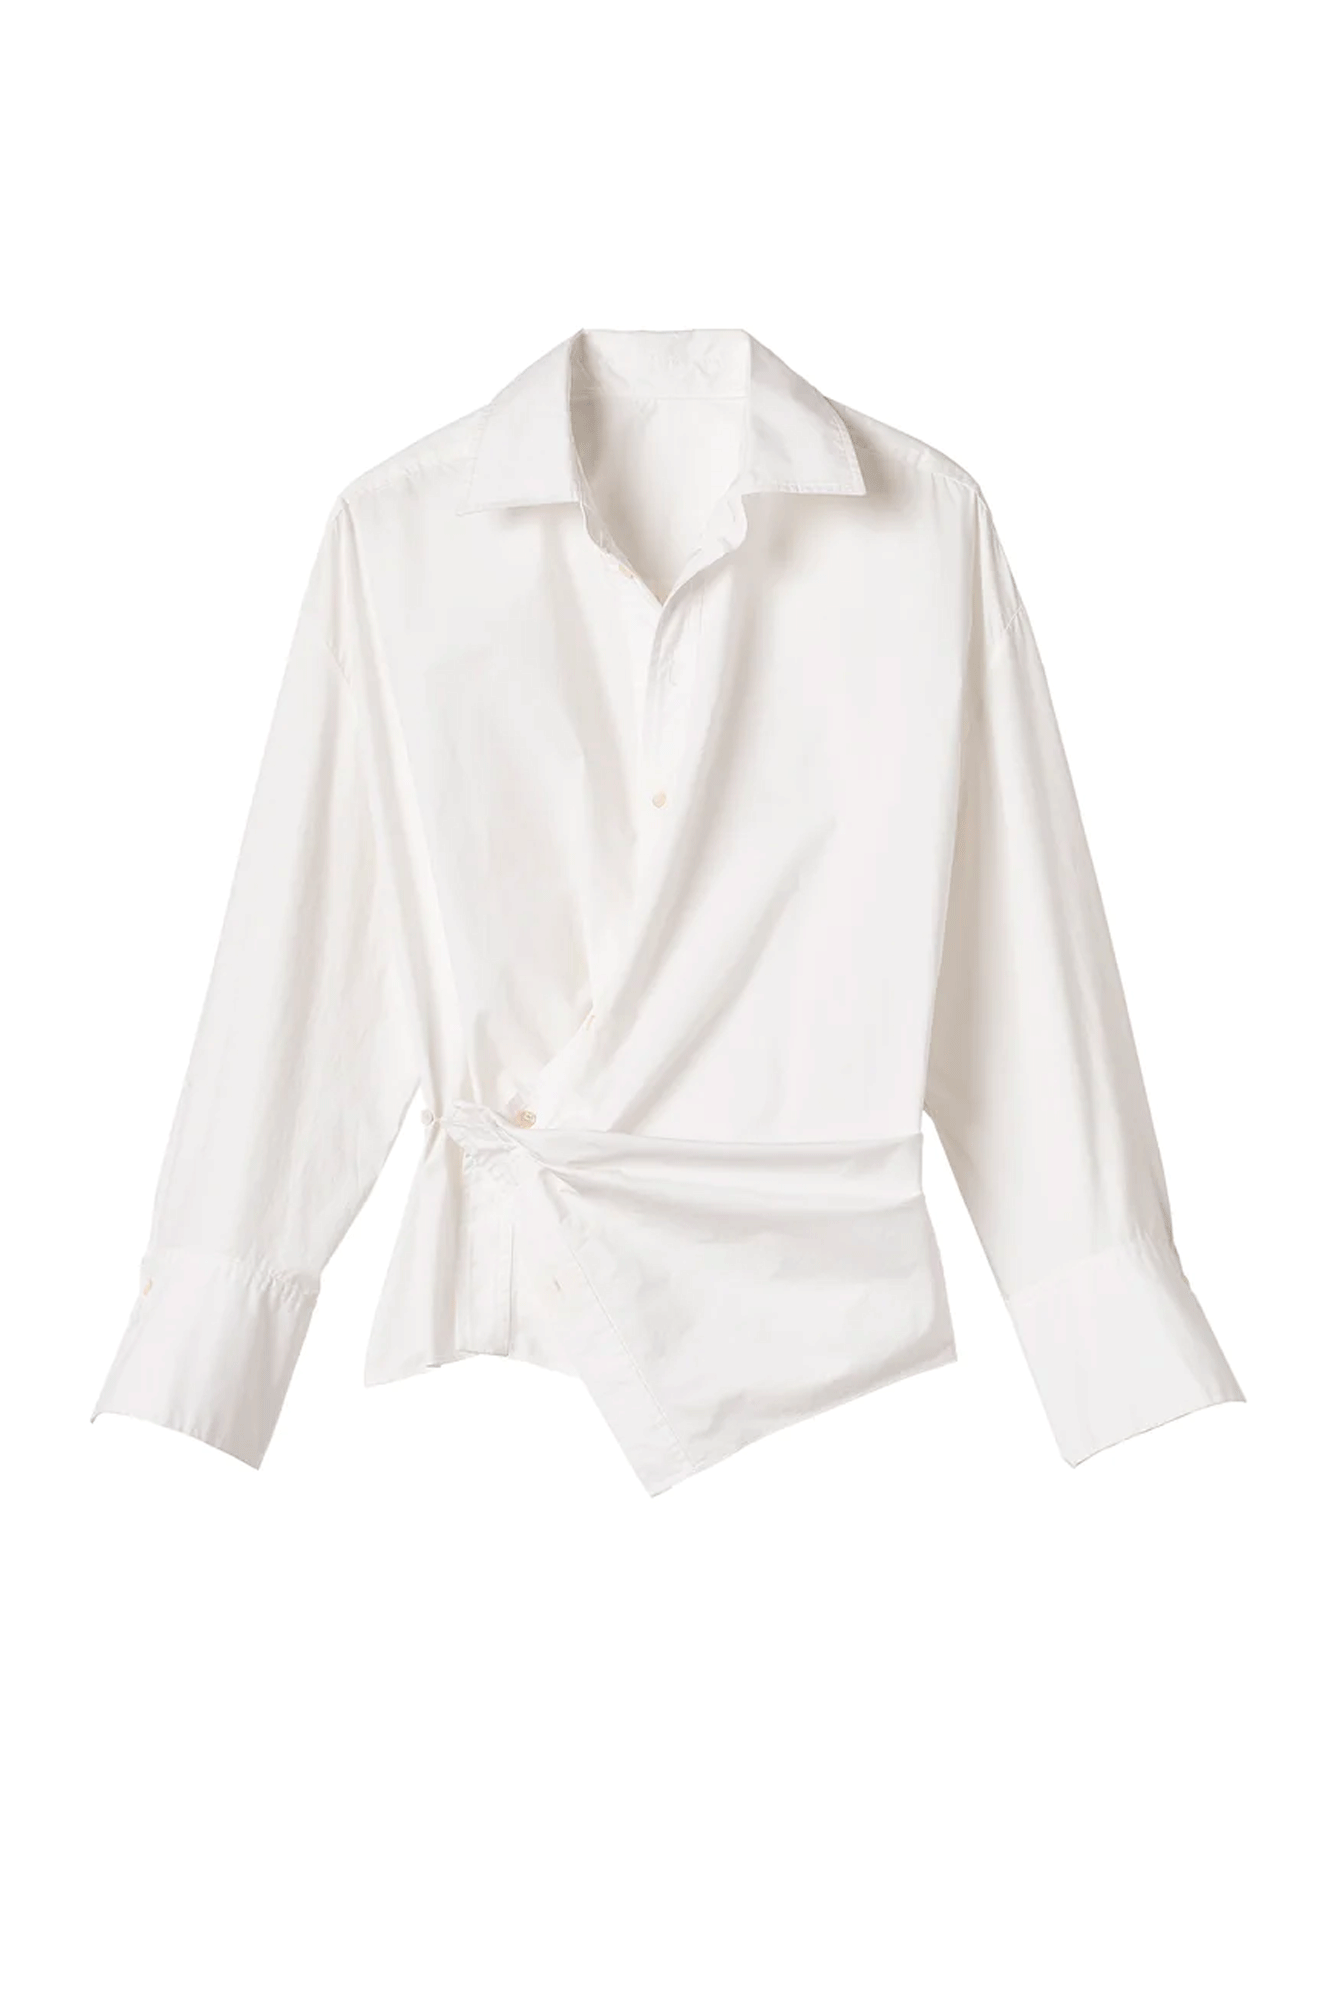 Introducing the Madison Top from A.L.C., for a crisp, classic look. This shirt features a sharp collar, long, voluminous sleeves, and a unique side-buttoning waist wrap for a flattering fit. Embrace timeless style with this wardrobe essential.